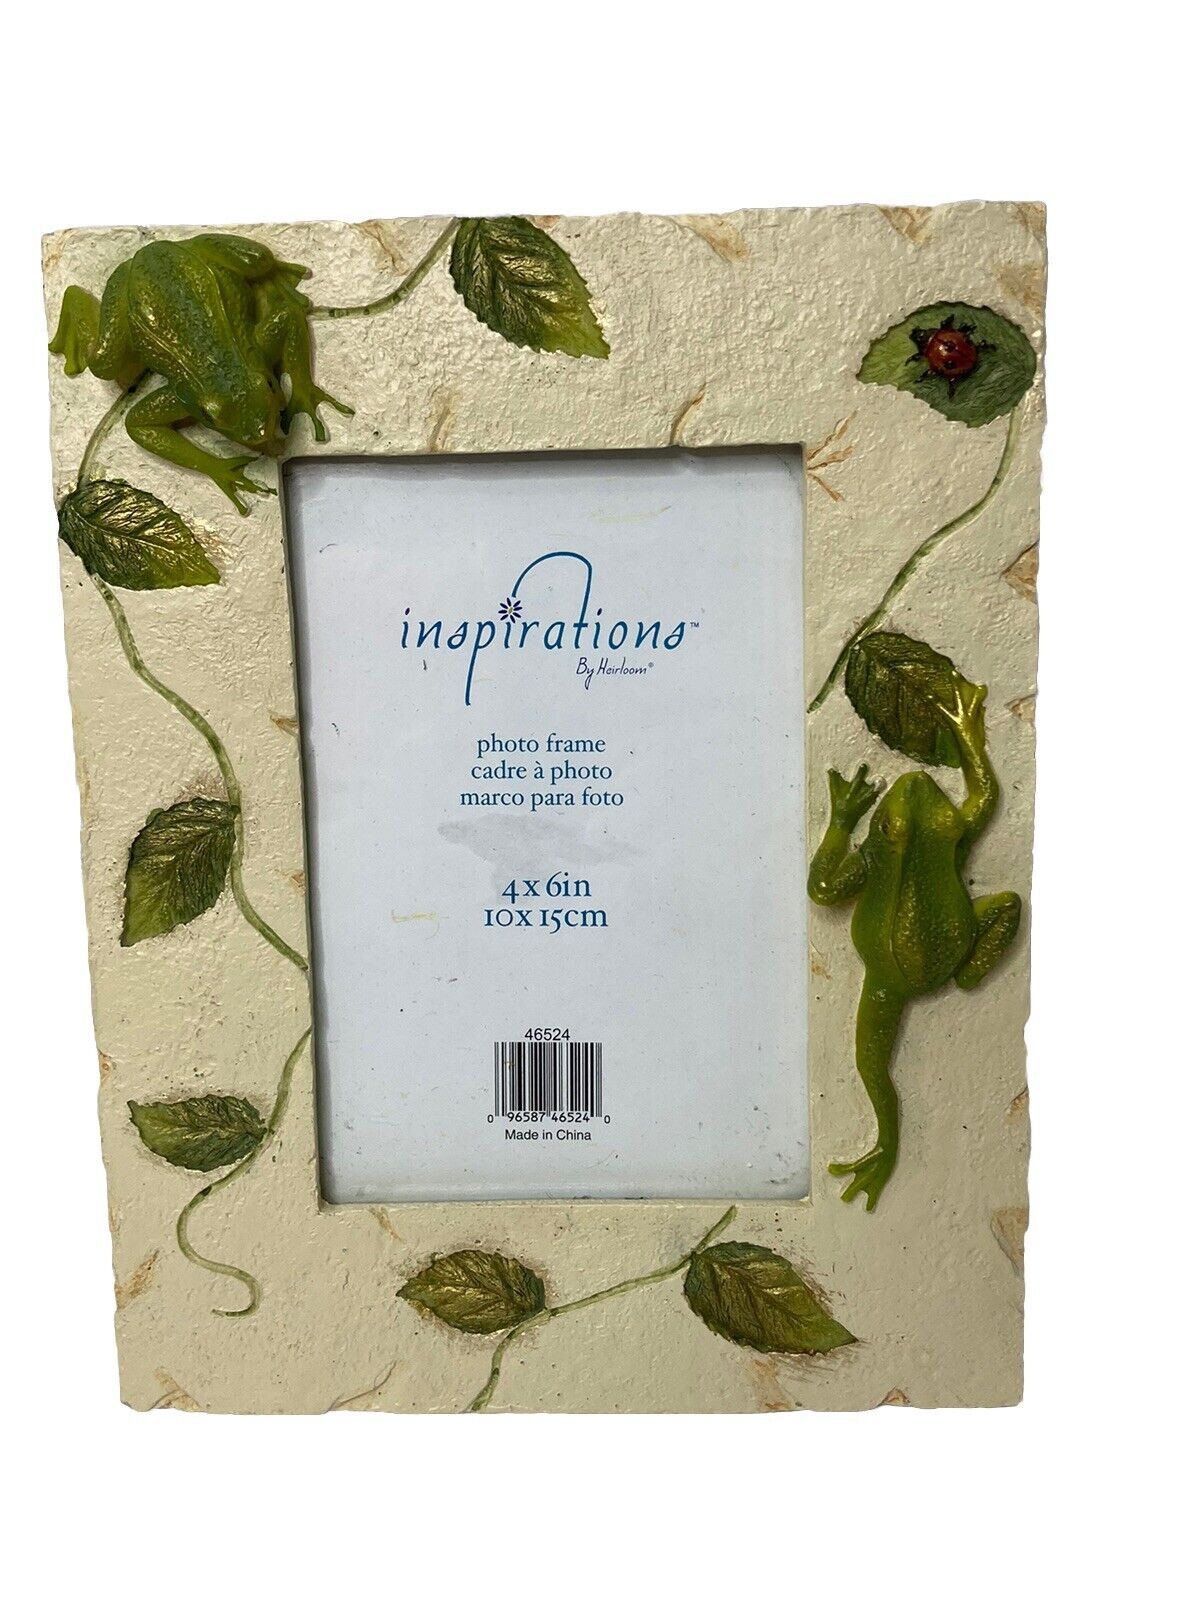 3D Frog Picture Frame Inspirations By Heirloom Vertical Standing holds 4x6